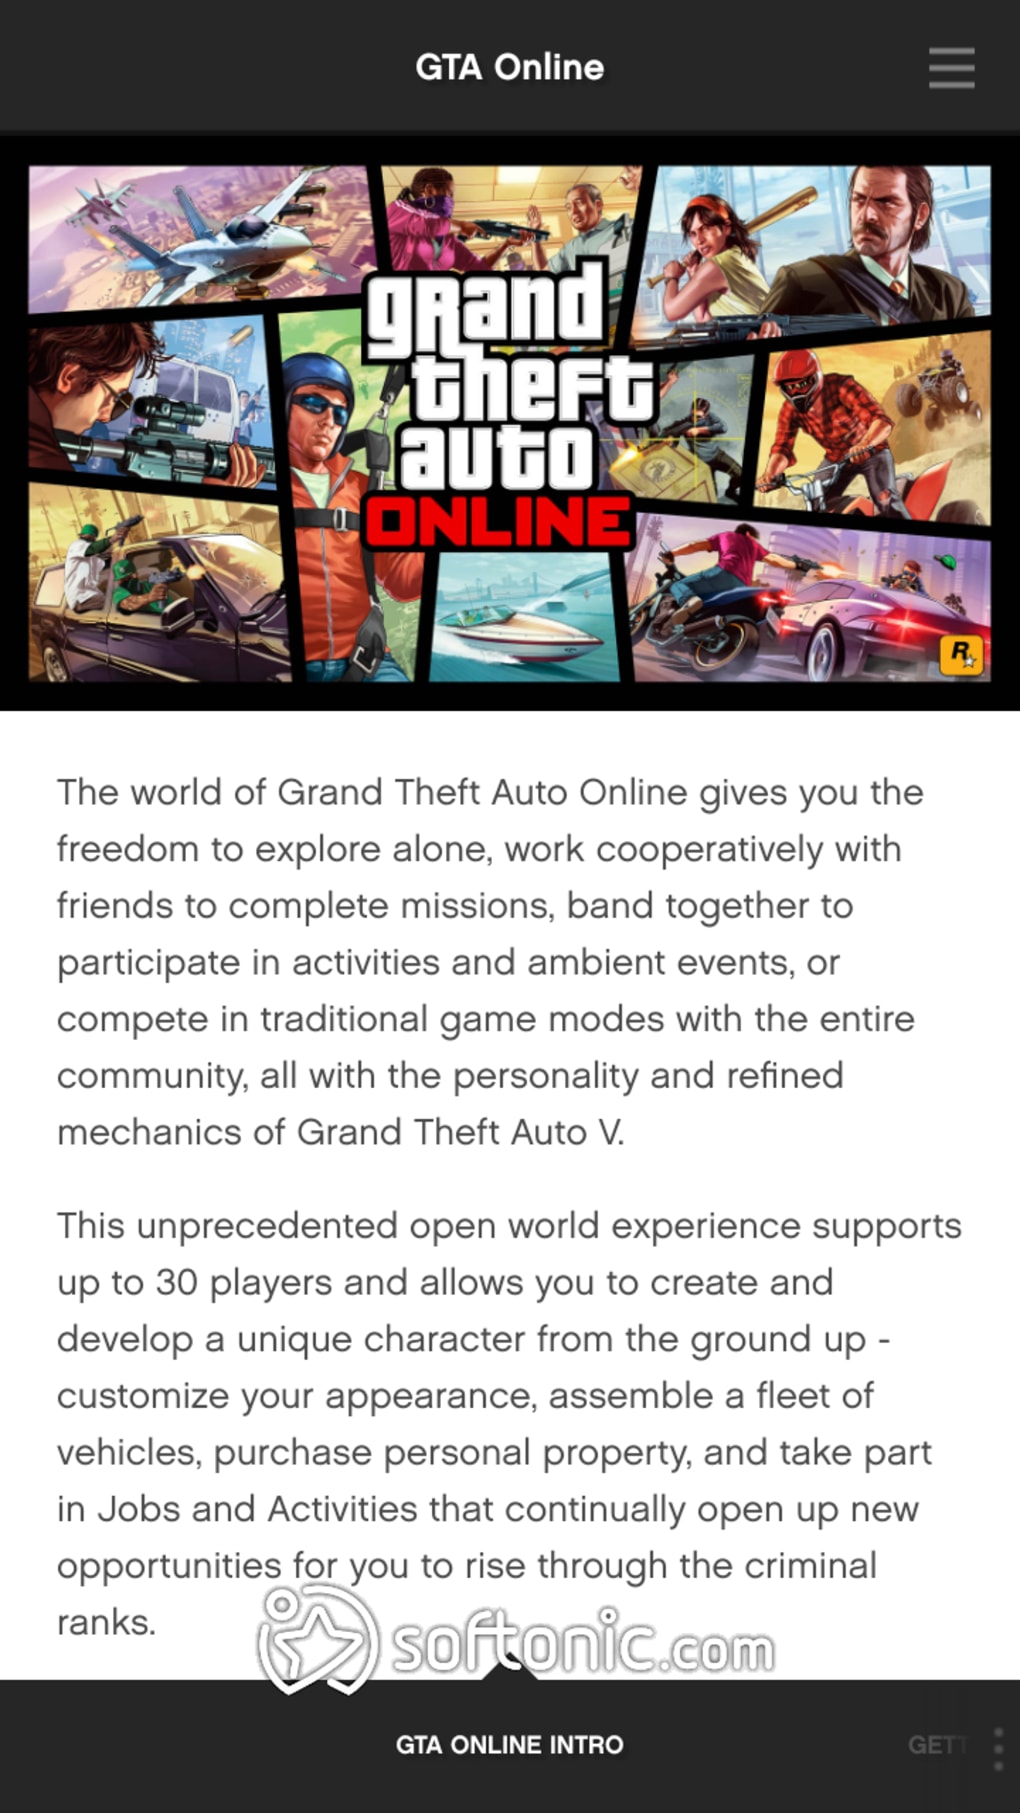 Download Grand Theft Auto V - Unofficial APK 0.2.1 for Android